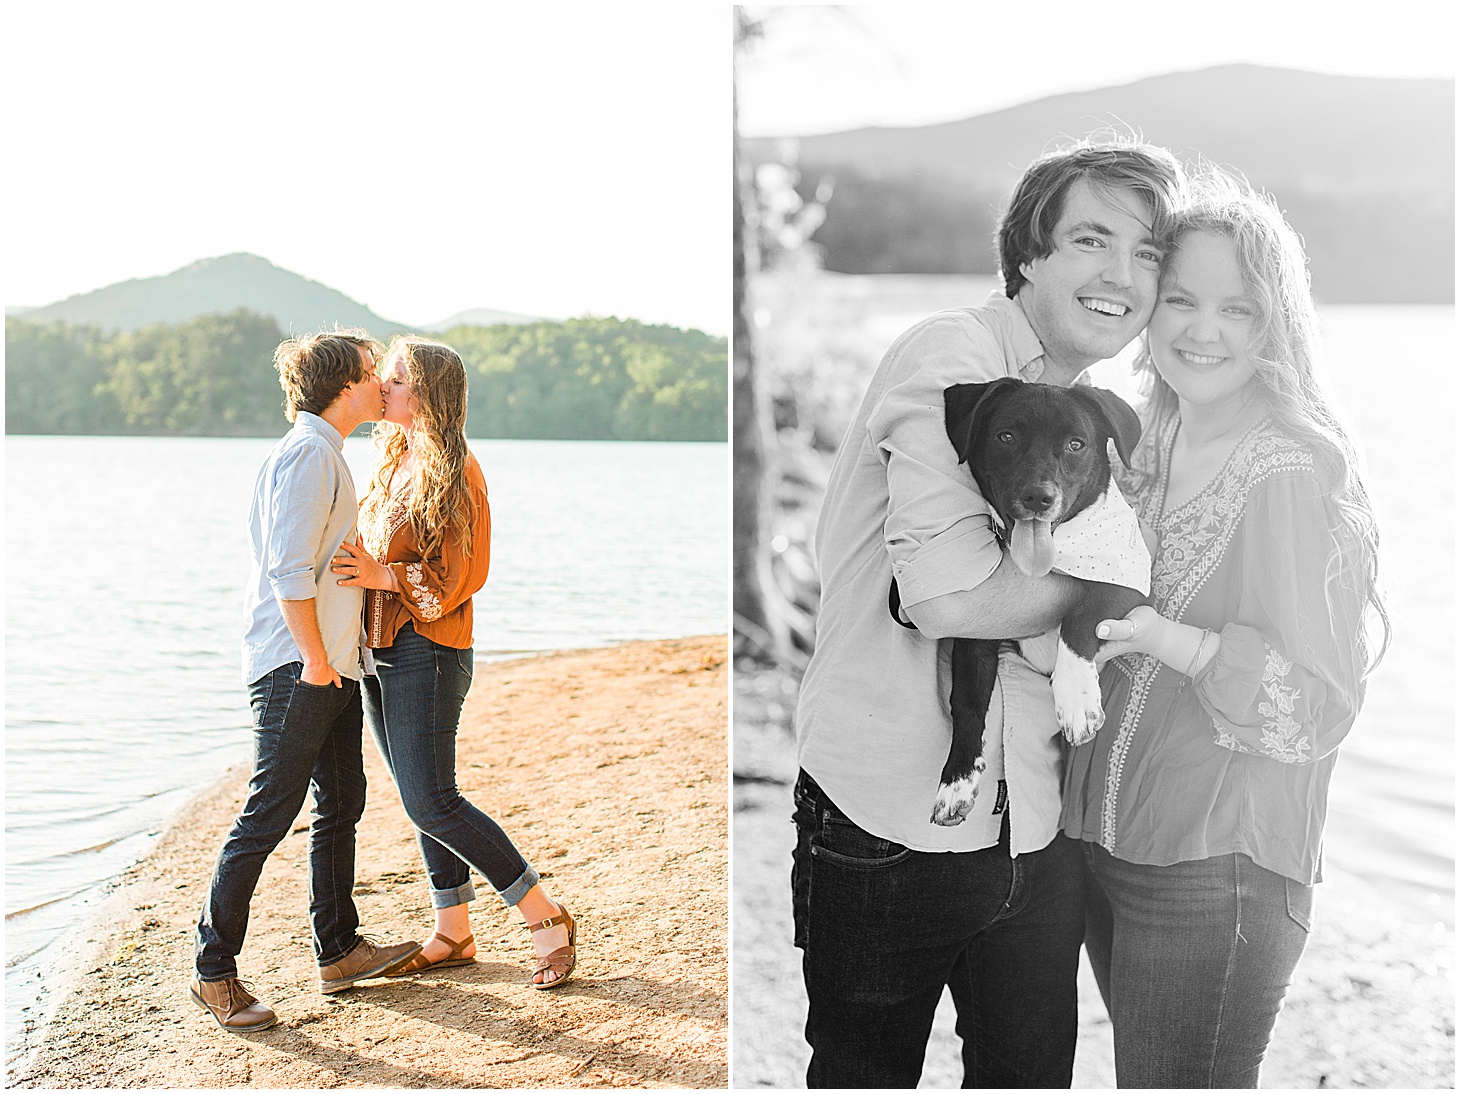 carvinscoveengagementsession_roanokeengagementsession_carvinscove_virginiawedding_virginiaweddingphotographer_vaweddingphotographer_photo_0026.jpg